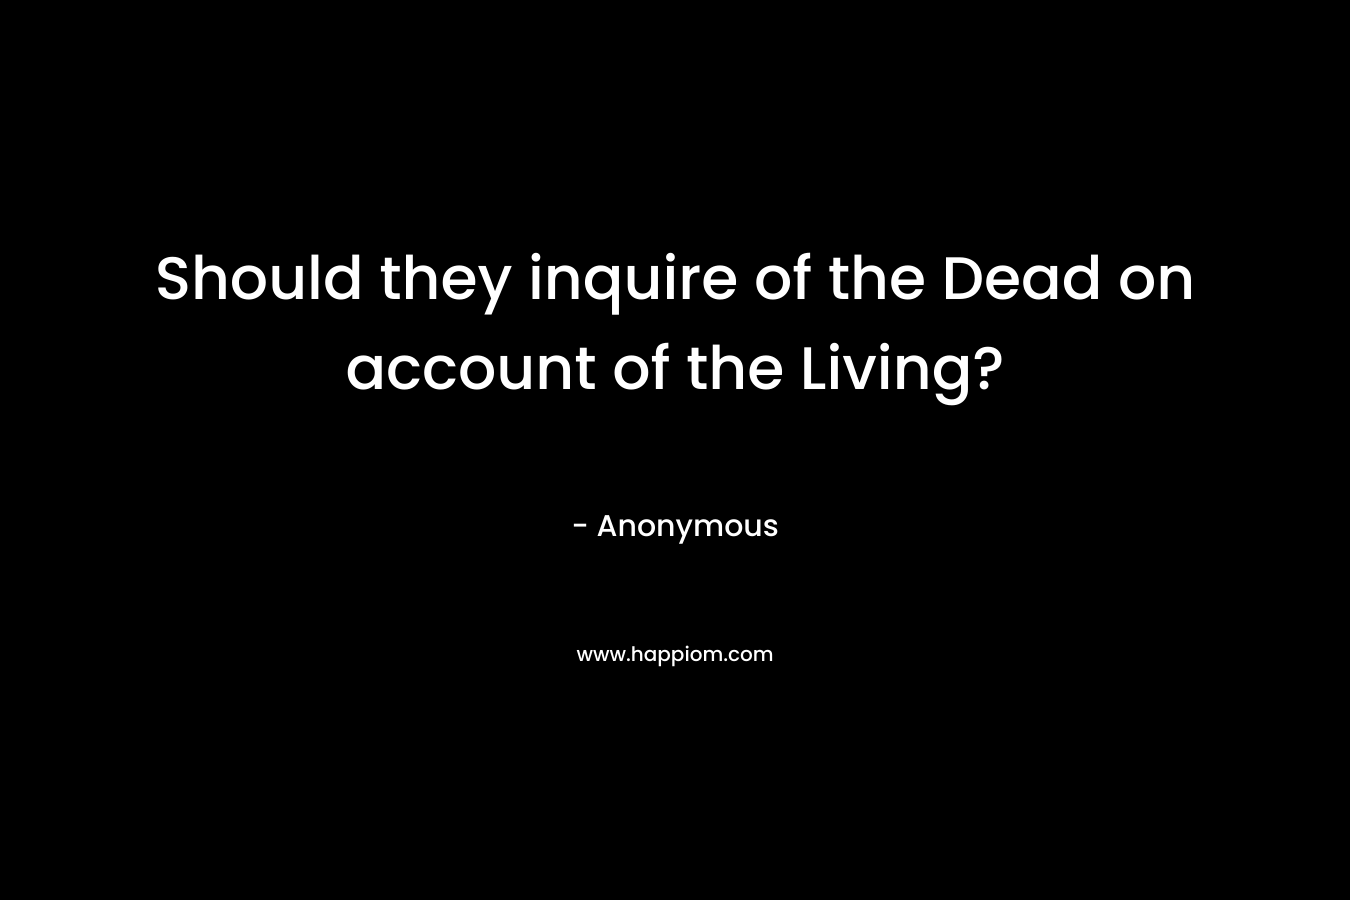 Should they inquire of the Dead on account of the Living?